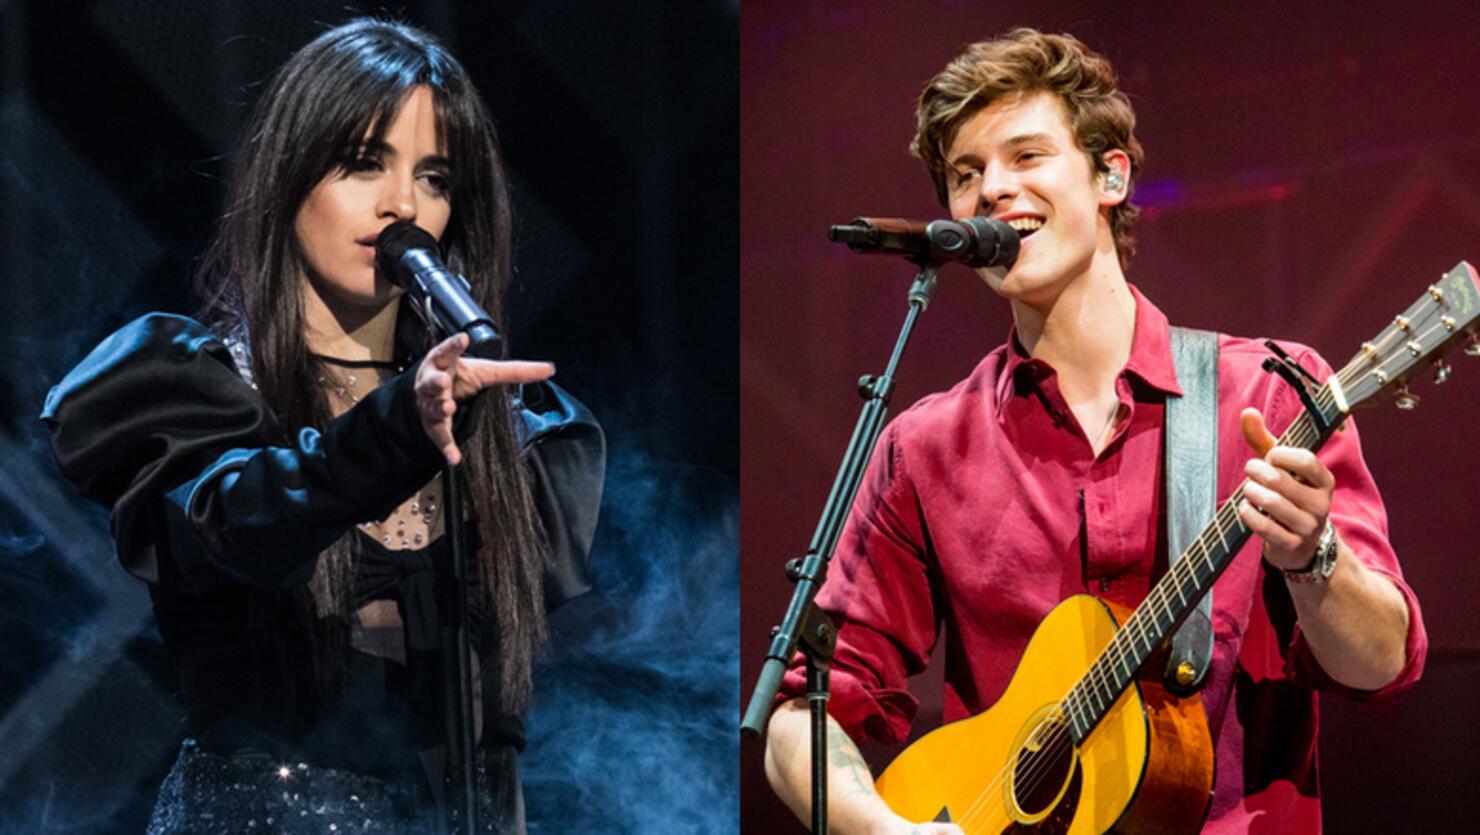 Camila Cabello & Shawn Mendes I Know What You Did Last Summer Part 2 New Song